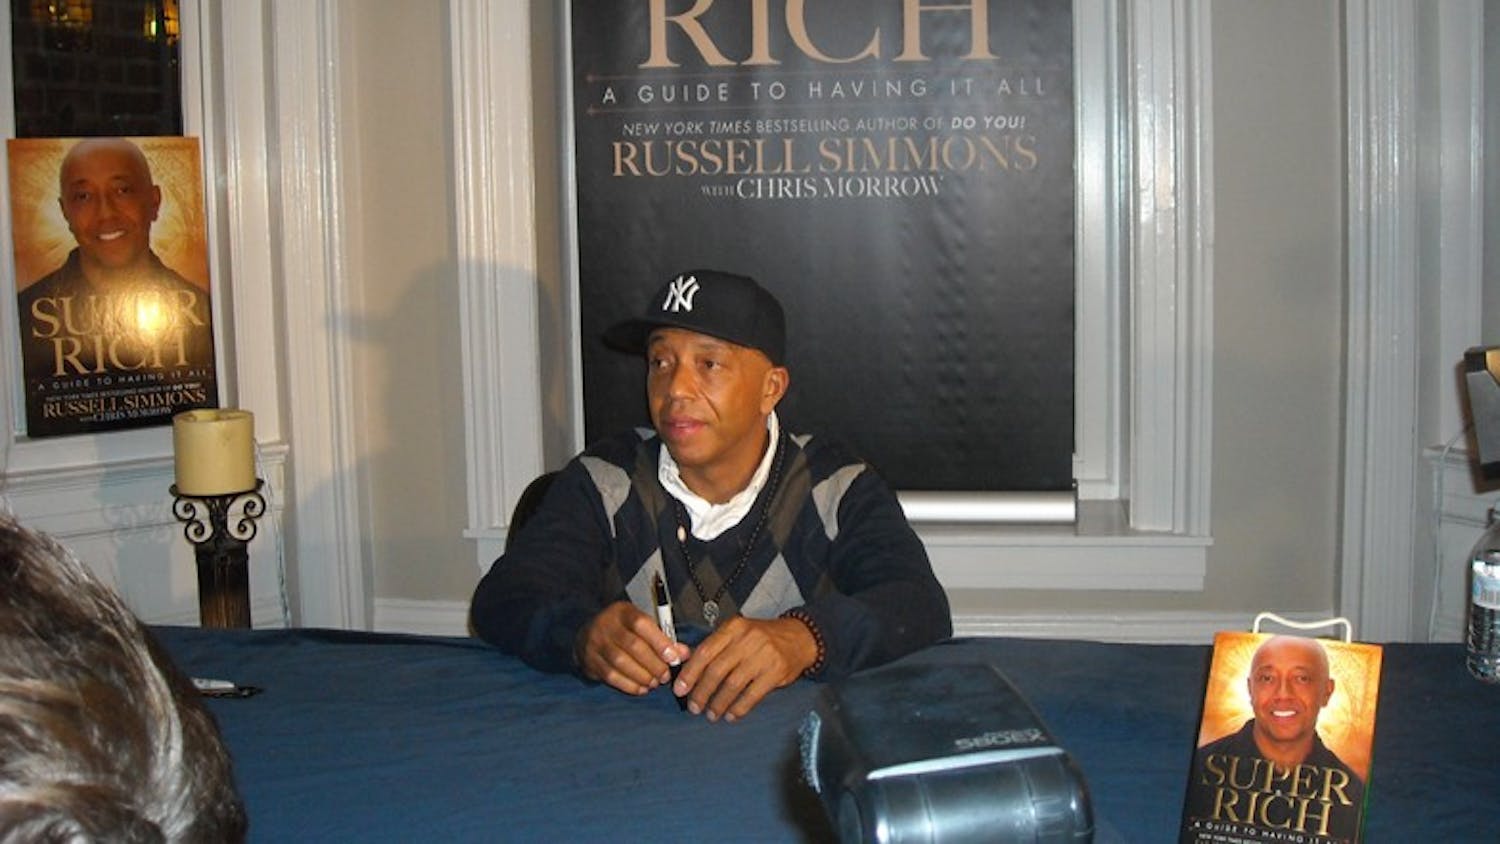 CELEBRITY GURU â€”  Self-made millionaire Russell Simmons has published a second book, ambitiously titled, â€œSuper Rich: A Guide to Having it All.â€ The star lays down rules for how to gain spiritual wealth.